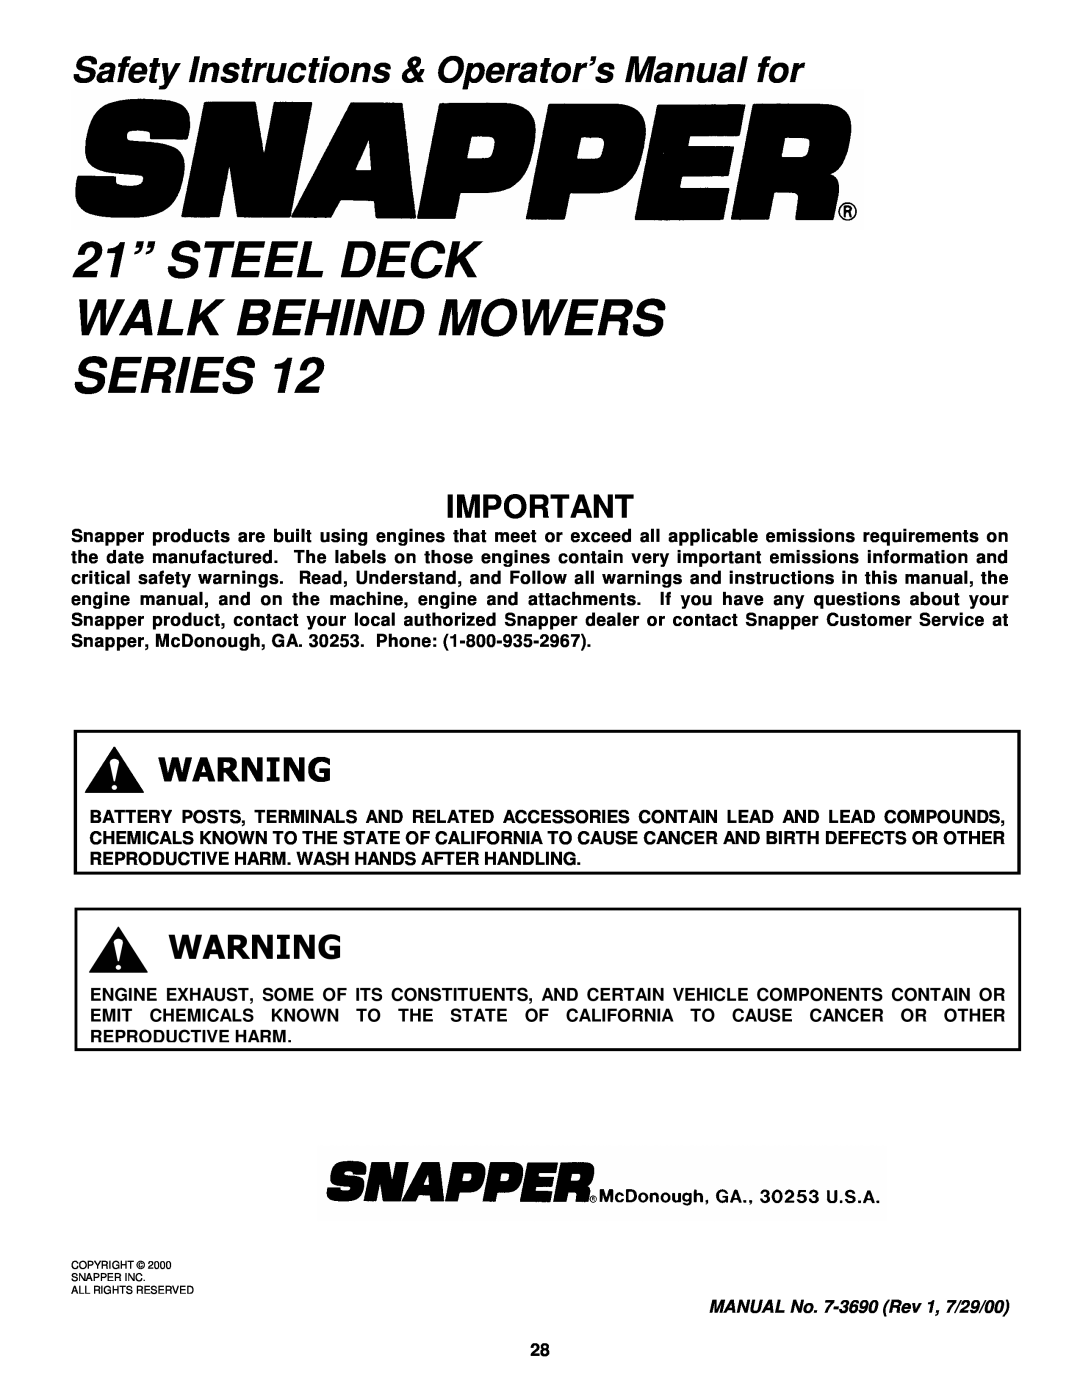 Snapper P216512BV, P216012, WP216512BV important safety instructions 21” STEEL DECK WALK BEHIND MOWERS SERIES 